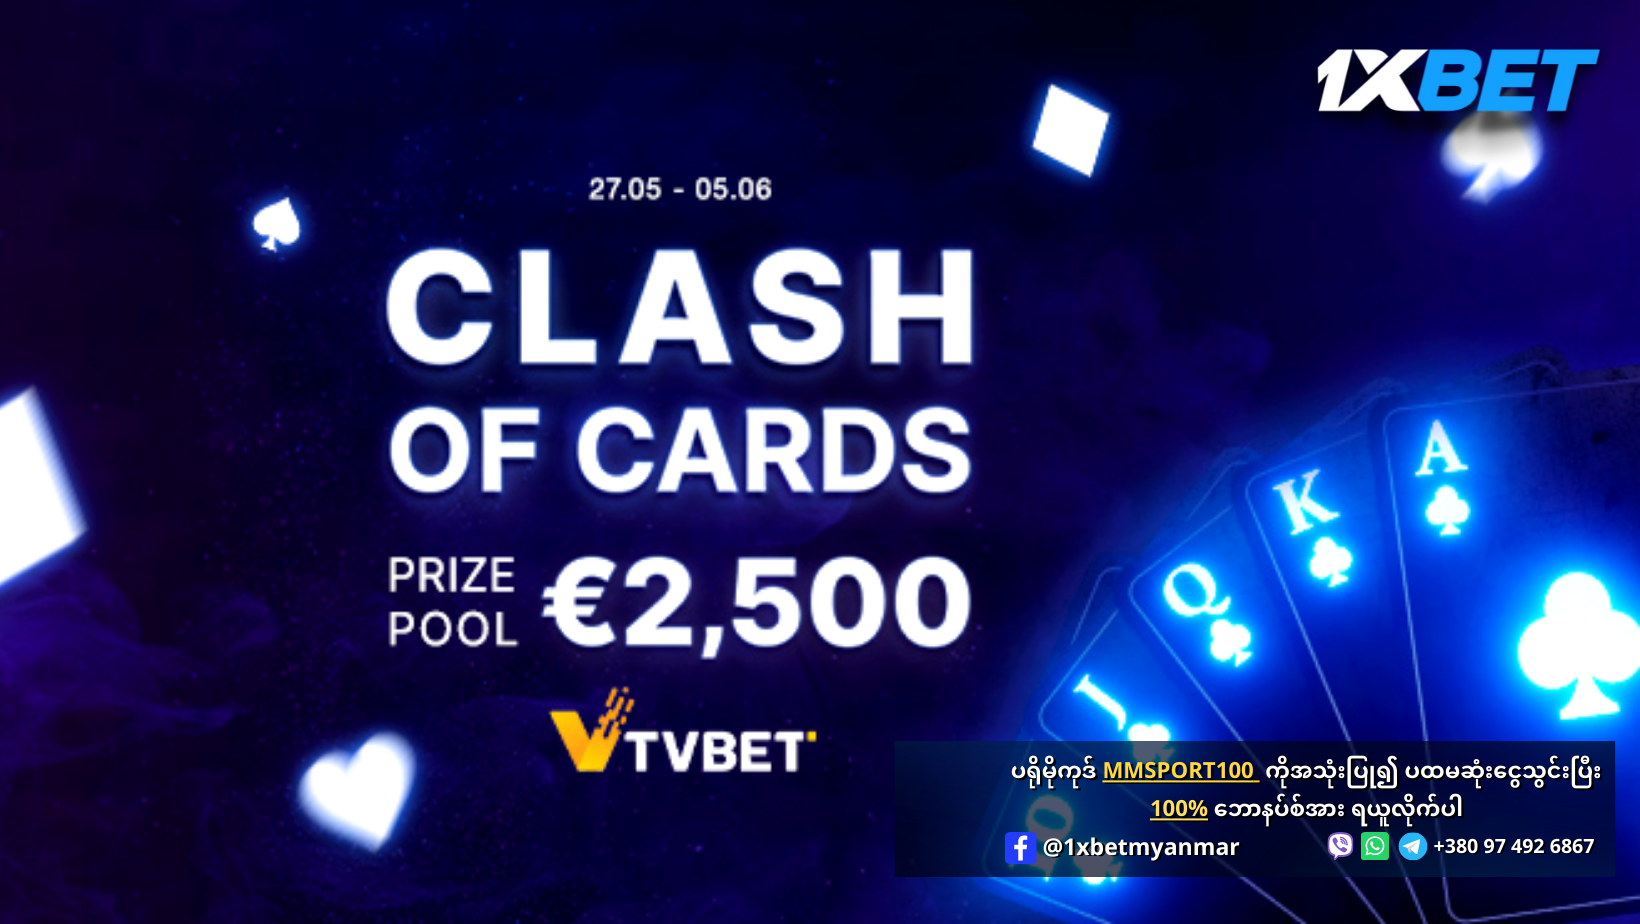 1xBet Clash Of Cards Promotion